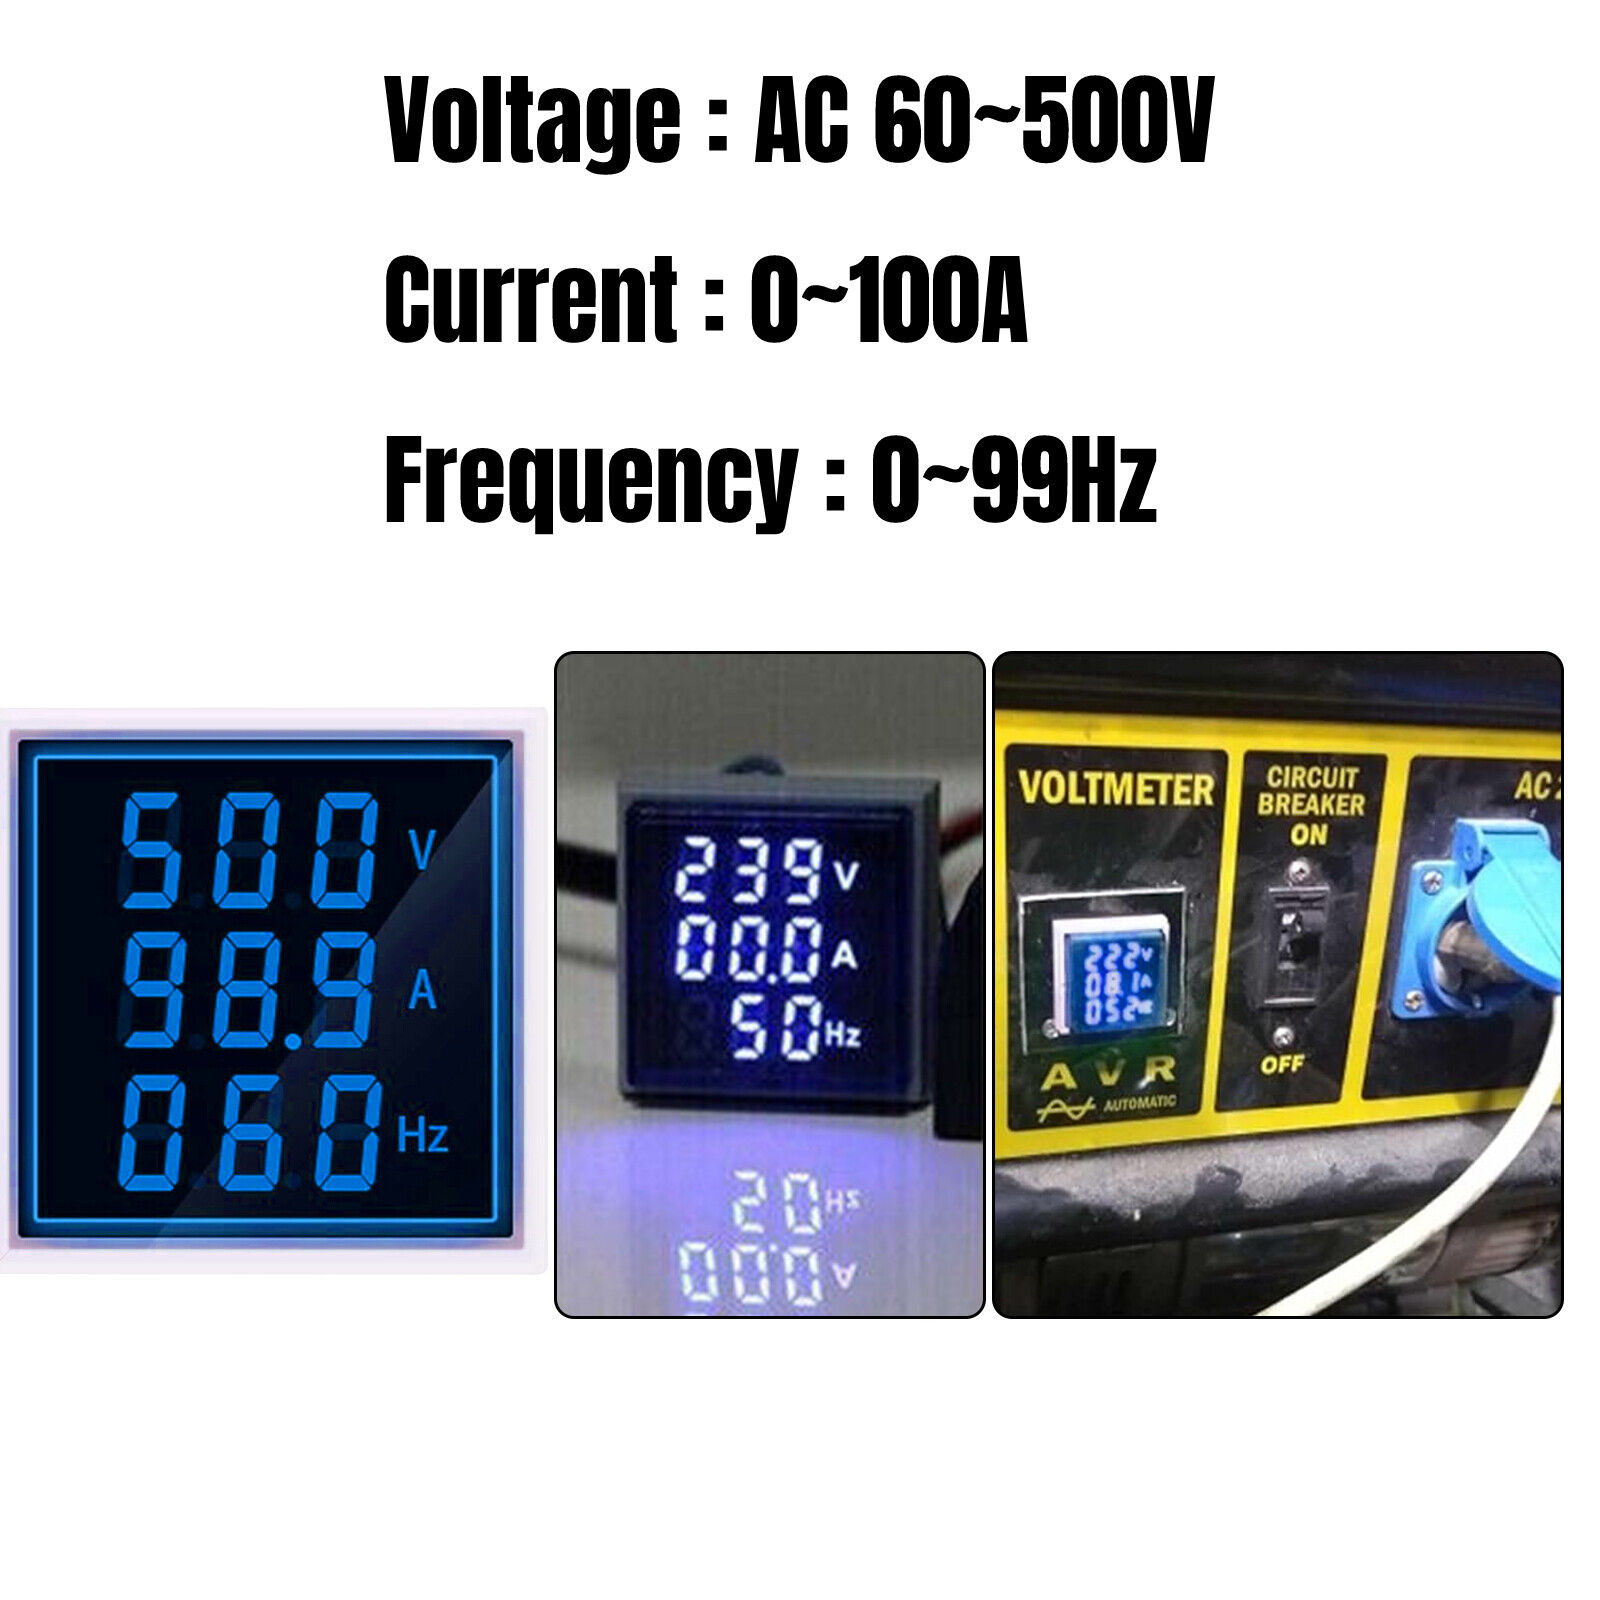 Great Choice Products Ac 60-500V 0-100A 0-99Hz 3In1 Voltmeter Ammeter Digital Volt Amp Frequency Meter